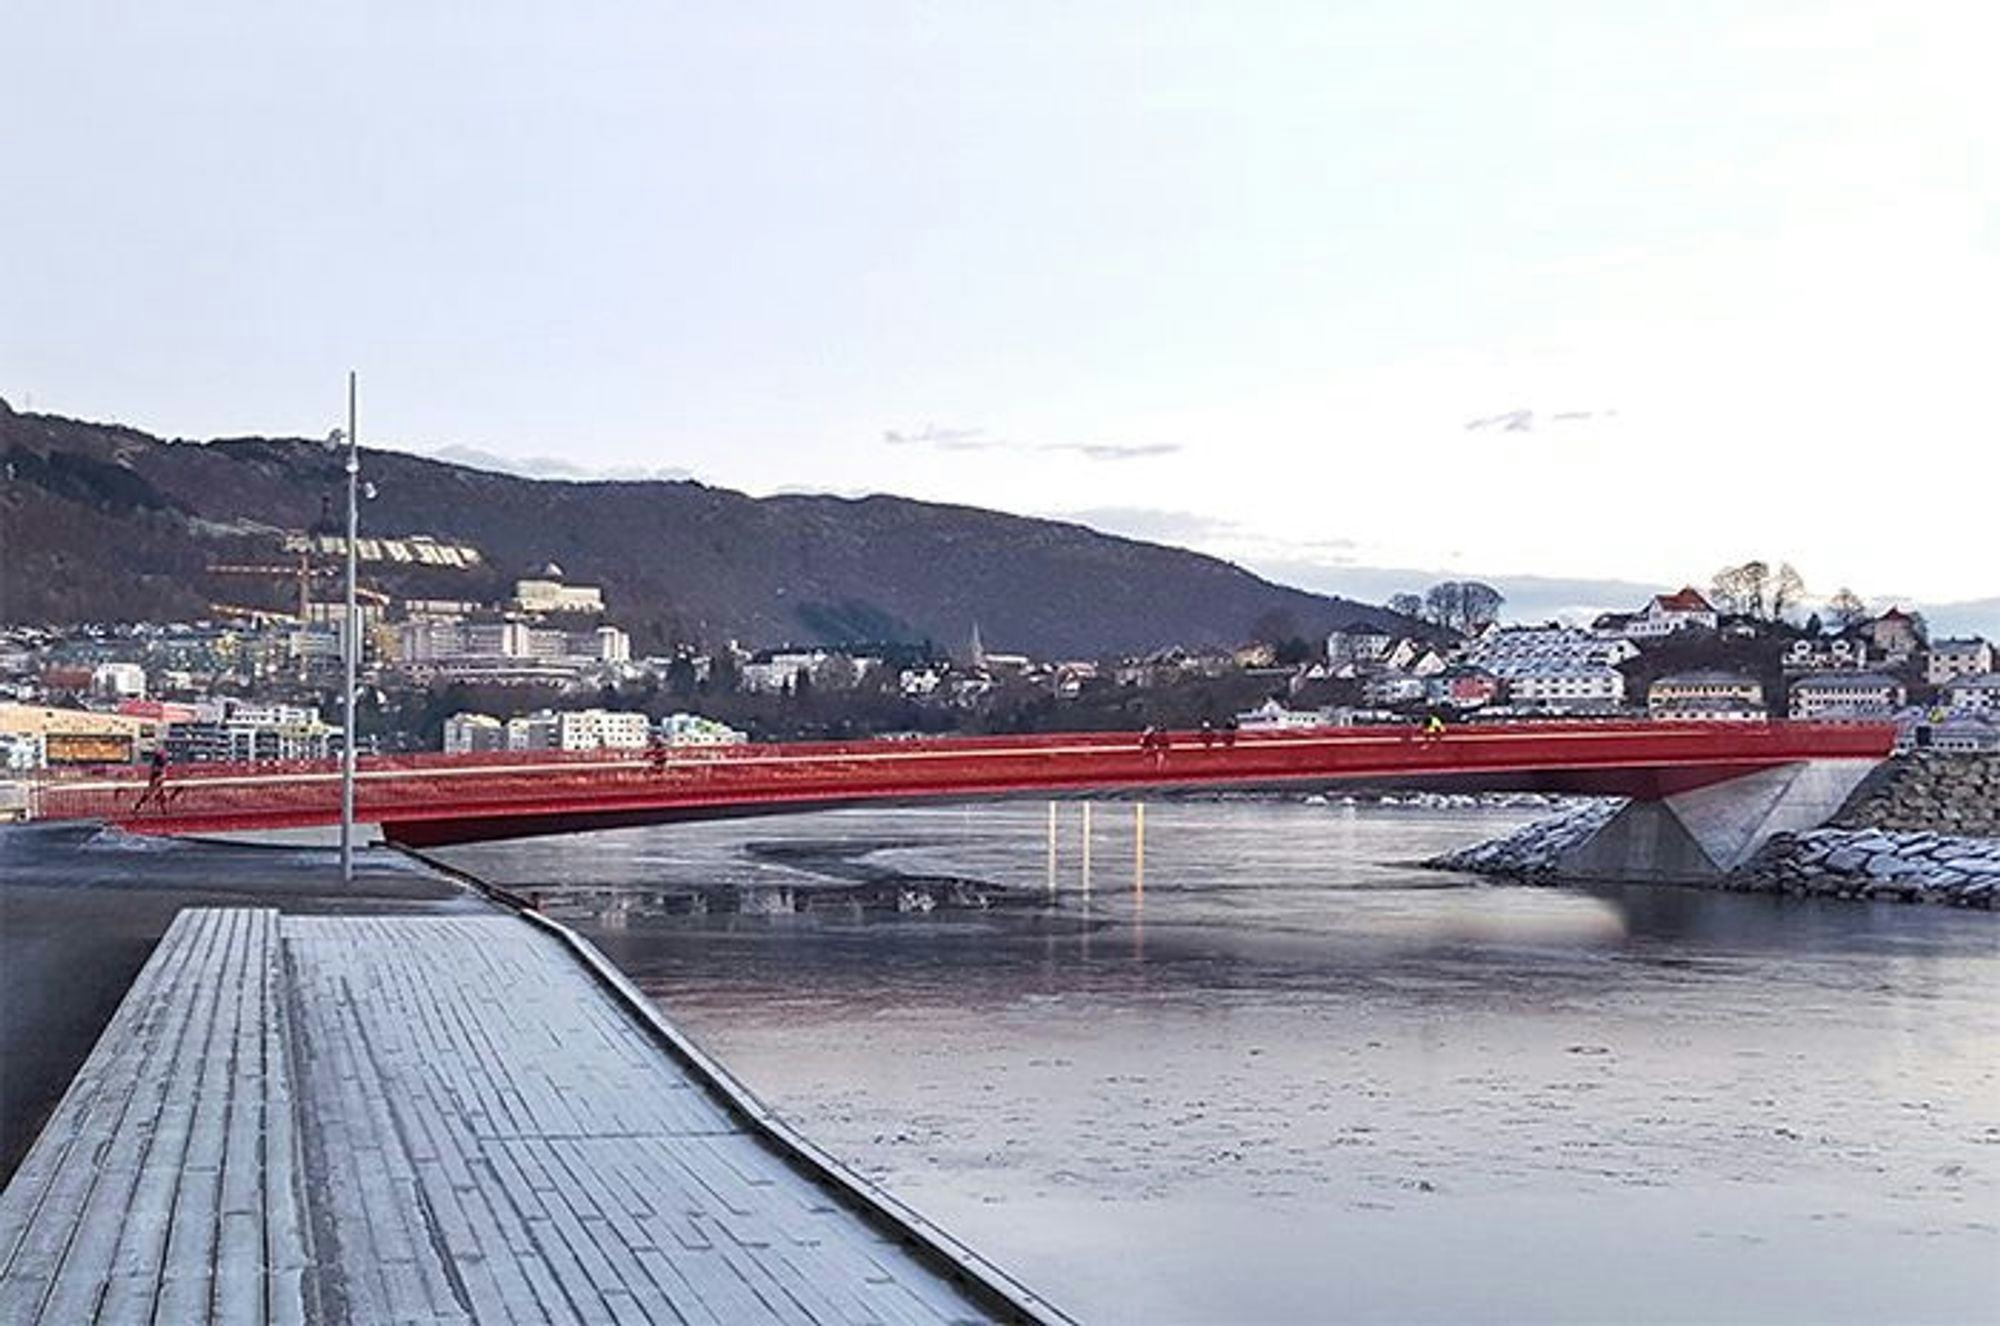 The photo captures a red pedestrian bridge over a calm water with a backdrop of a hilly town under a dusky sky